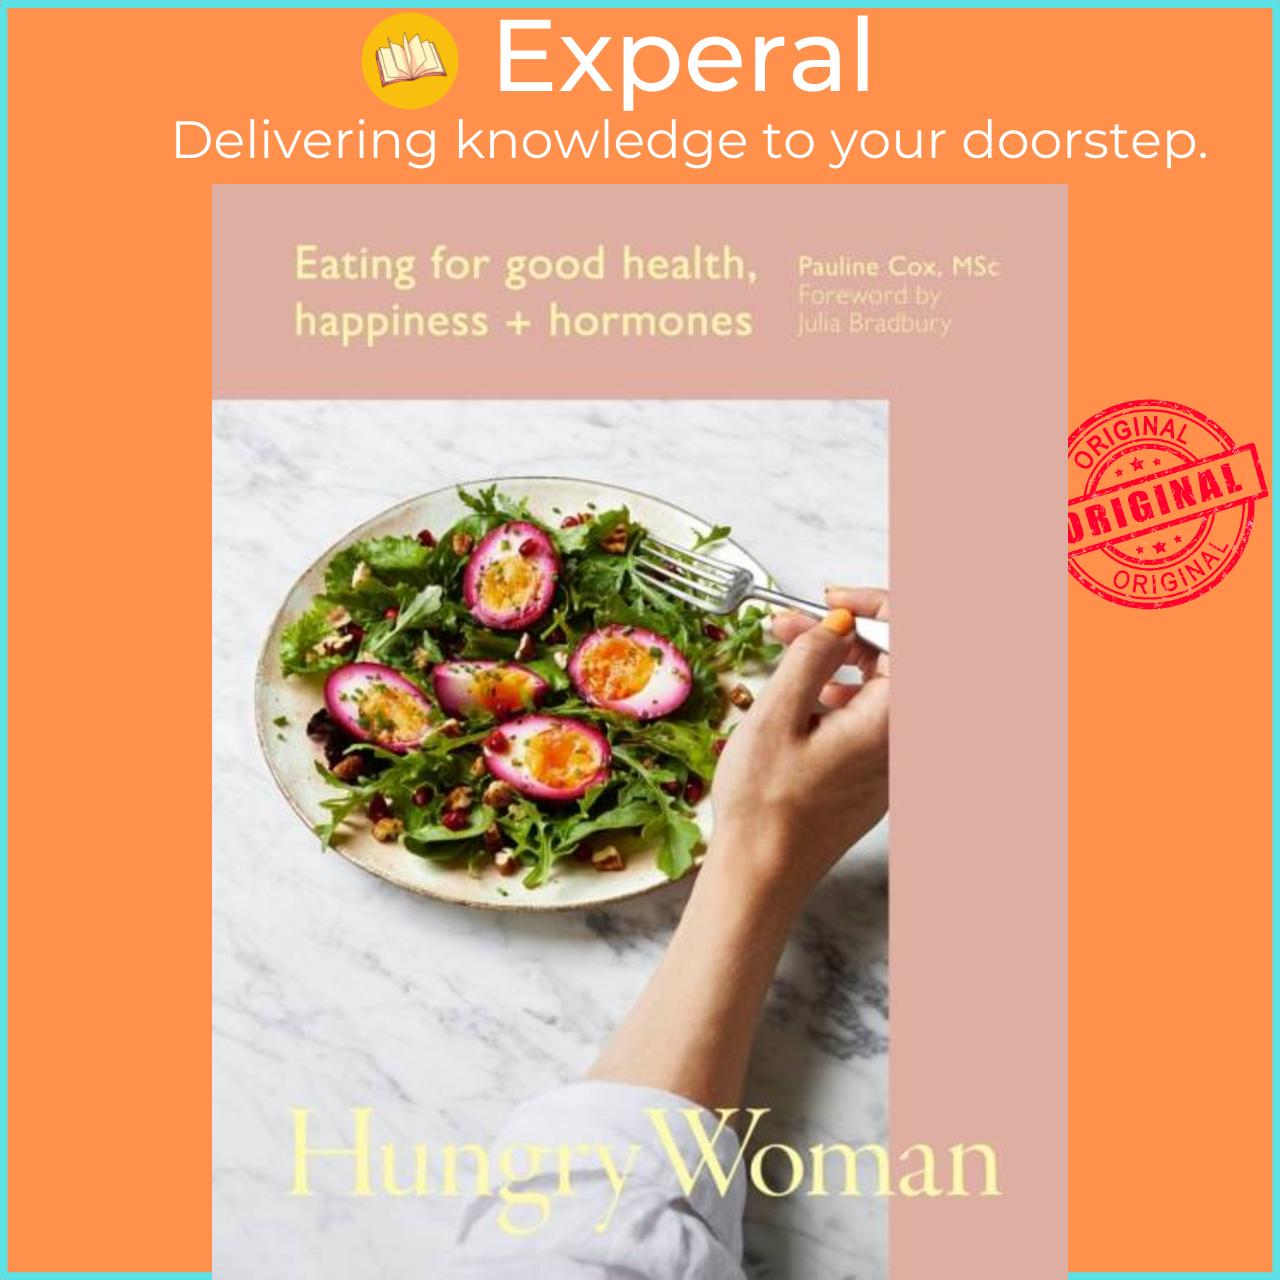 Sách - Hungry Woman - Eating for good health, happiness and hormones by Pauline Cox (UK edition, hardcover)